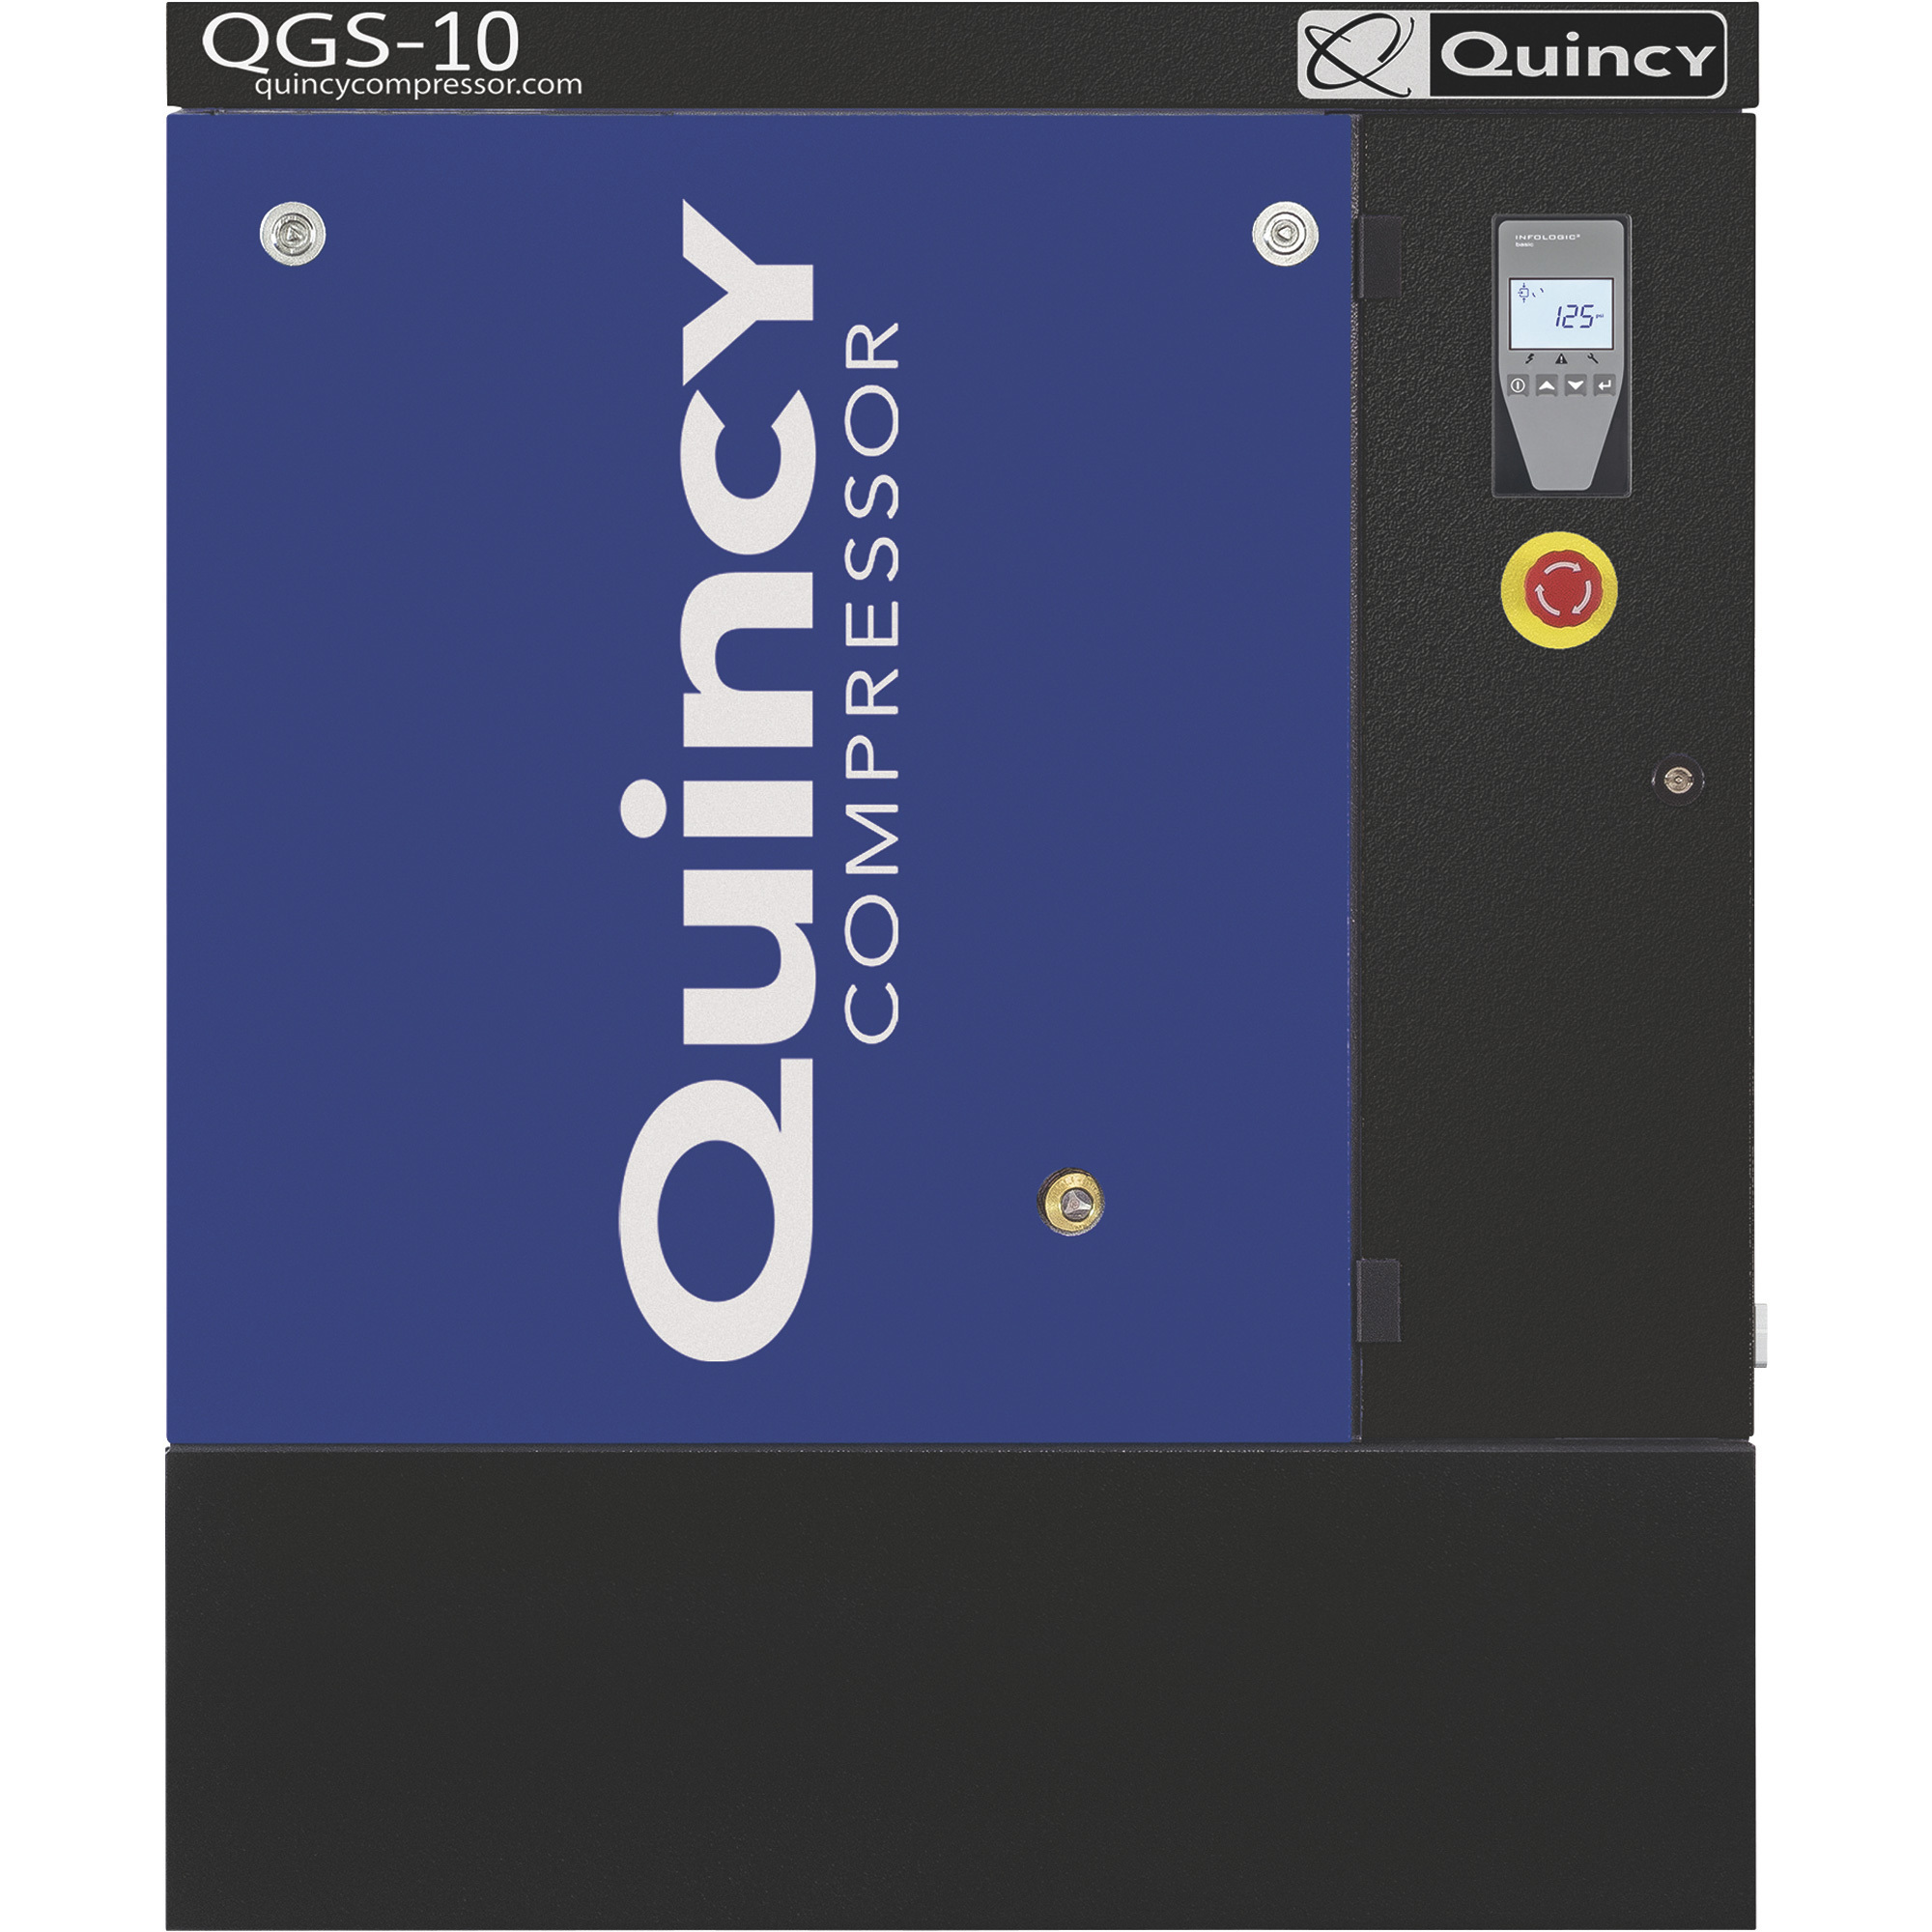 Quincy QGS-10 Rotary Screw Air Compressor, Floor Mounted, 208/230/460 Volt, 3-Phase, 38.8 CFM at 125 PSI, Model 4152021936